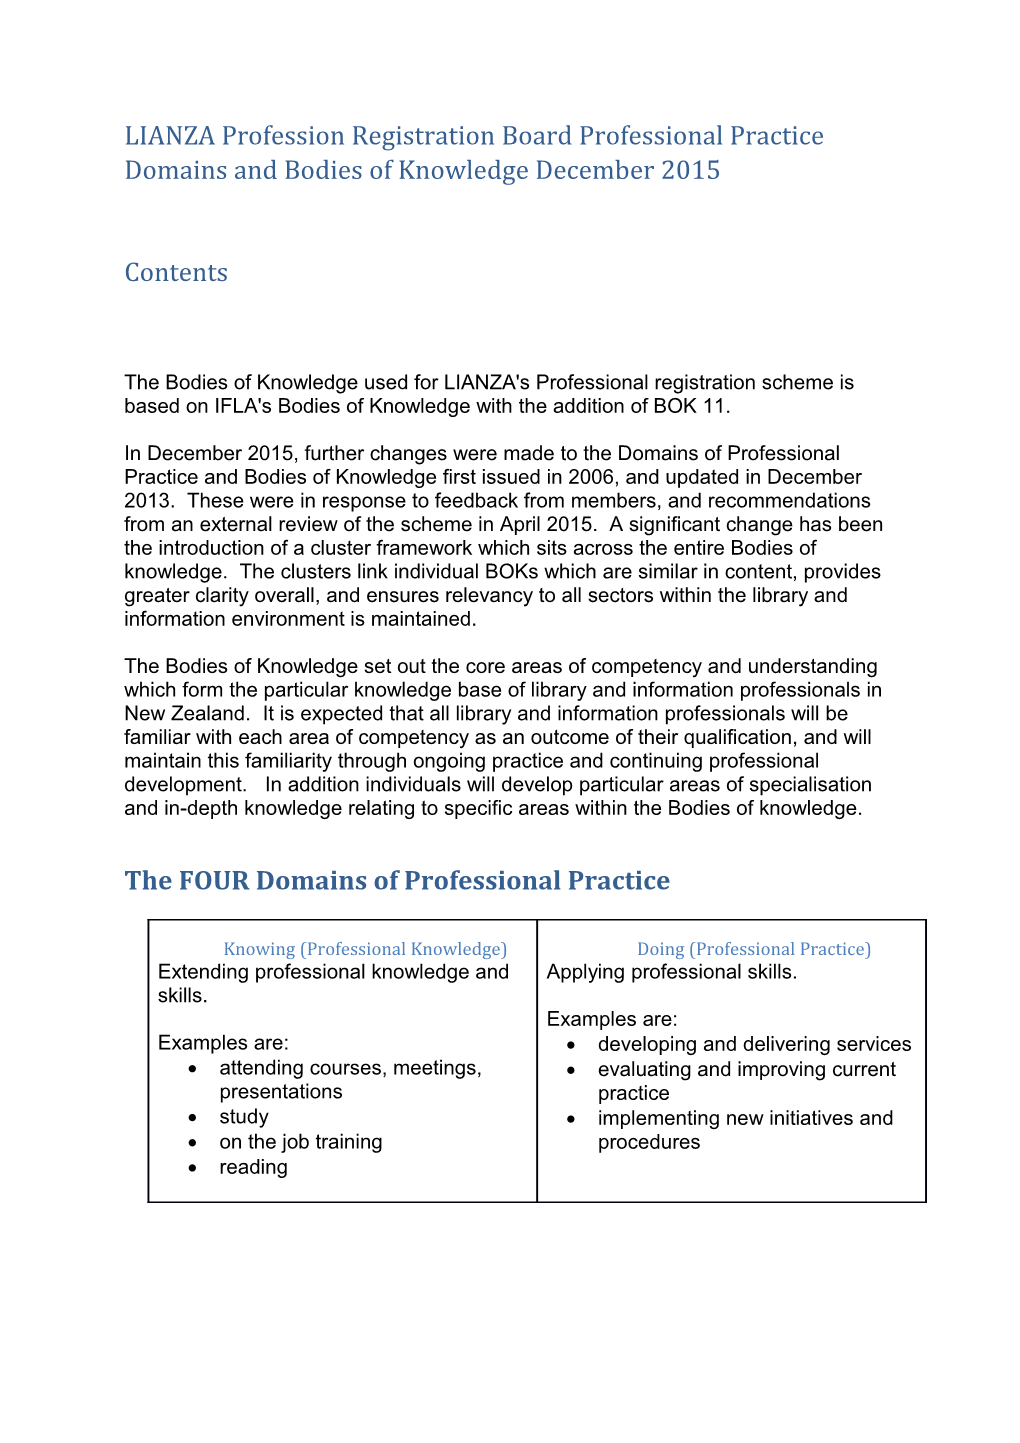 LIANZA Profession Registration Board Review of the Professional Practice Domains and Bodies